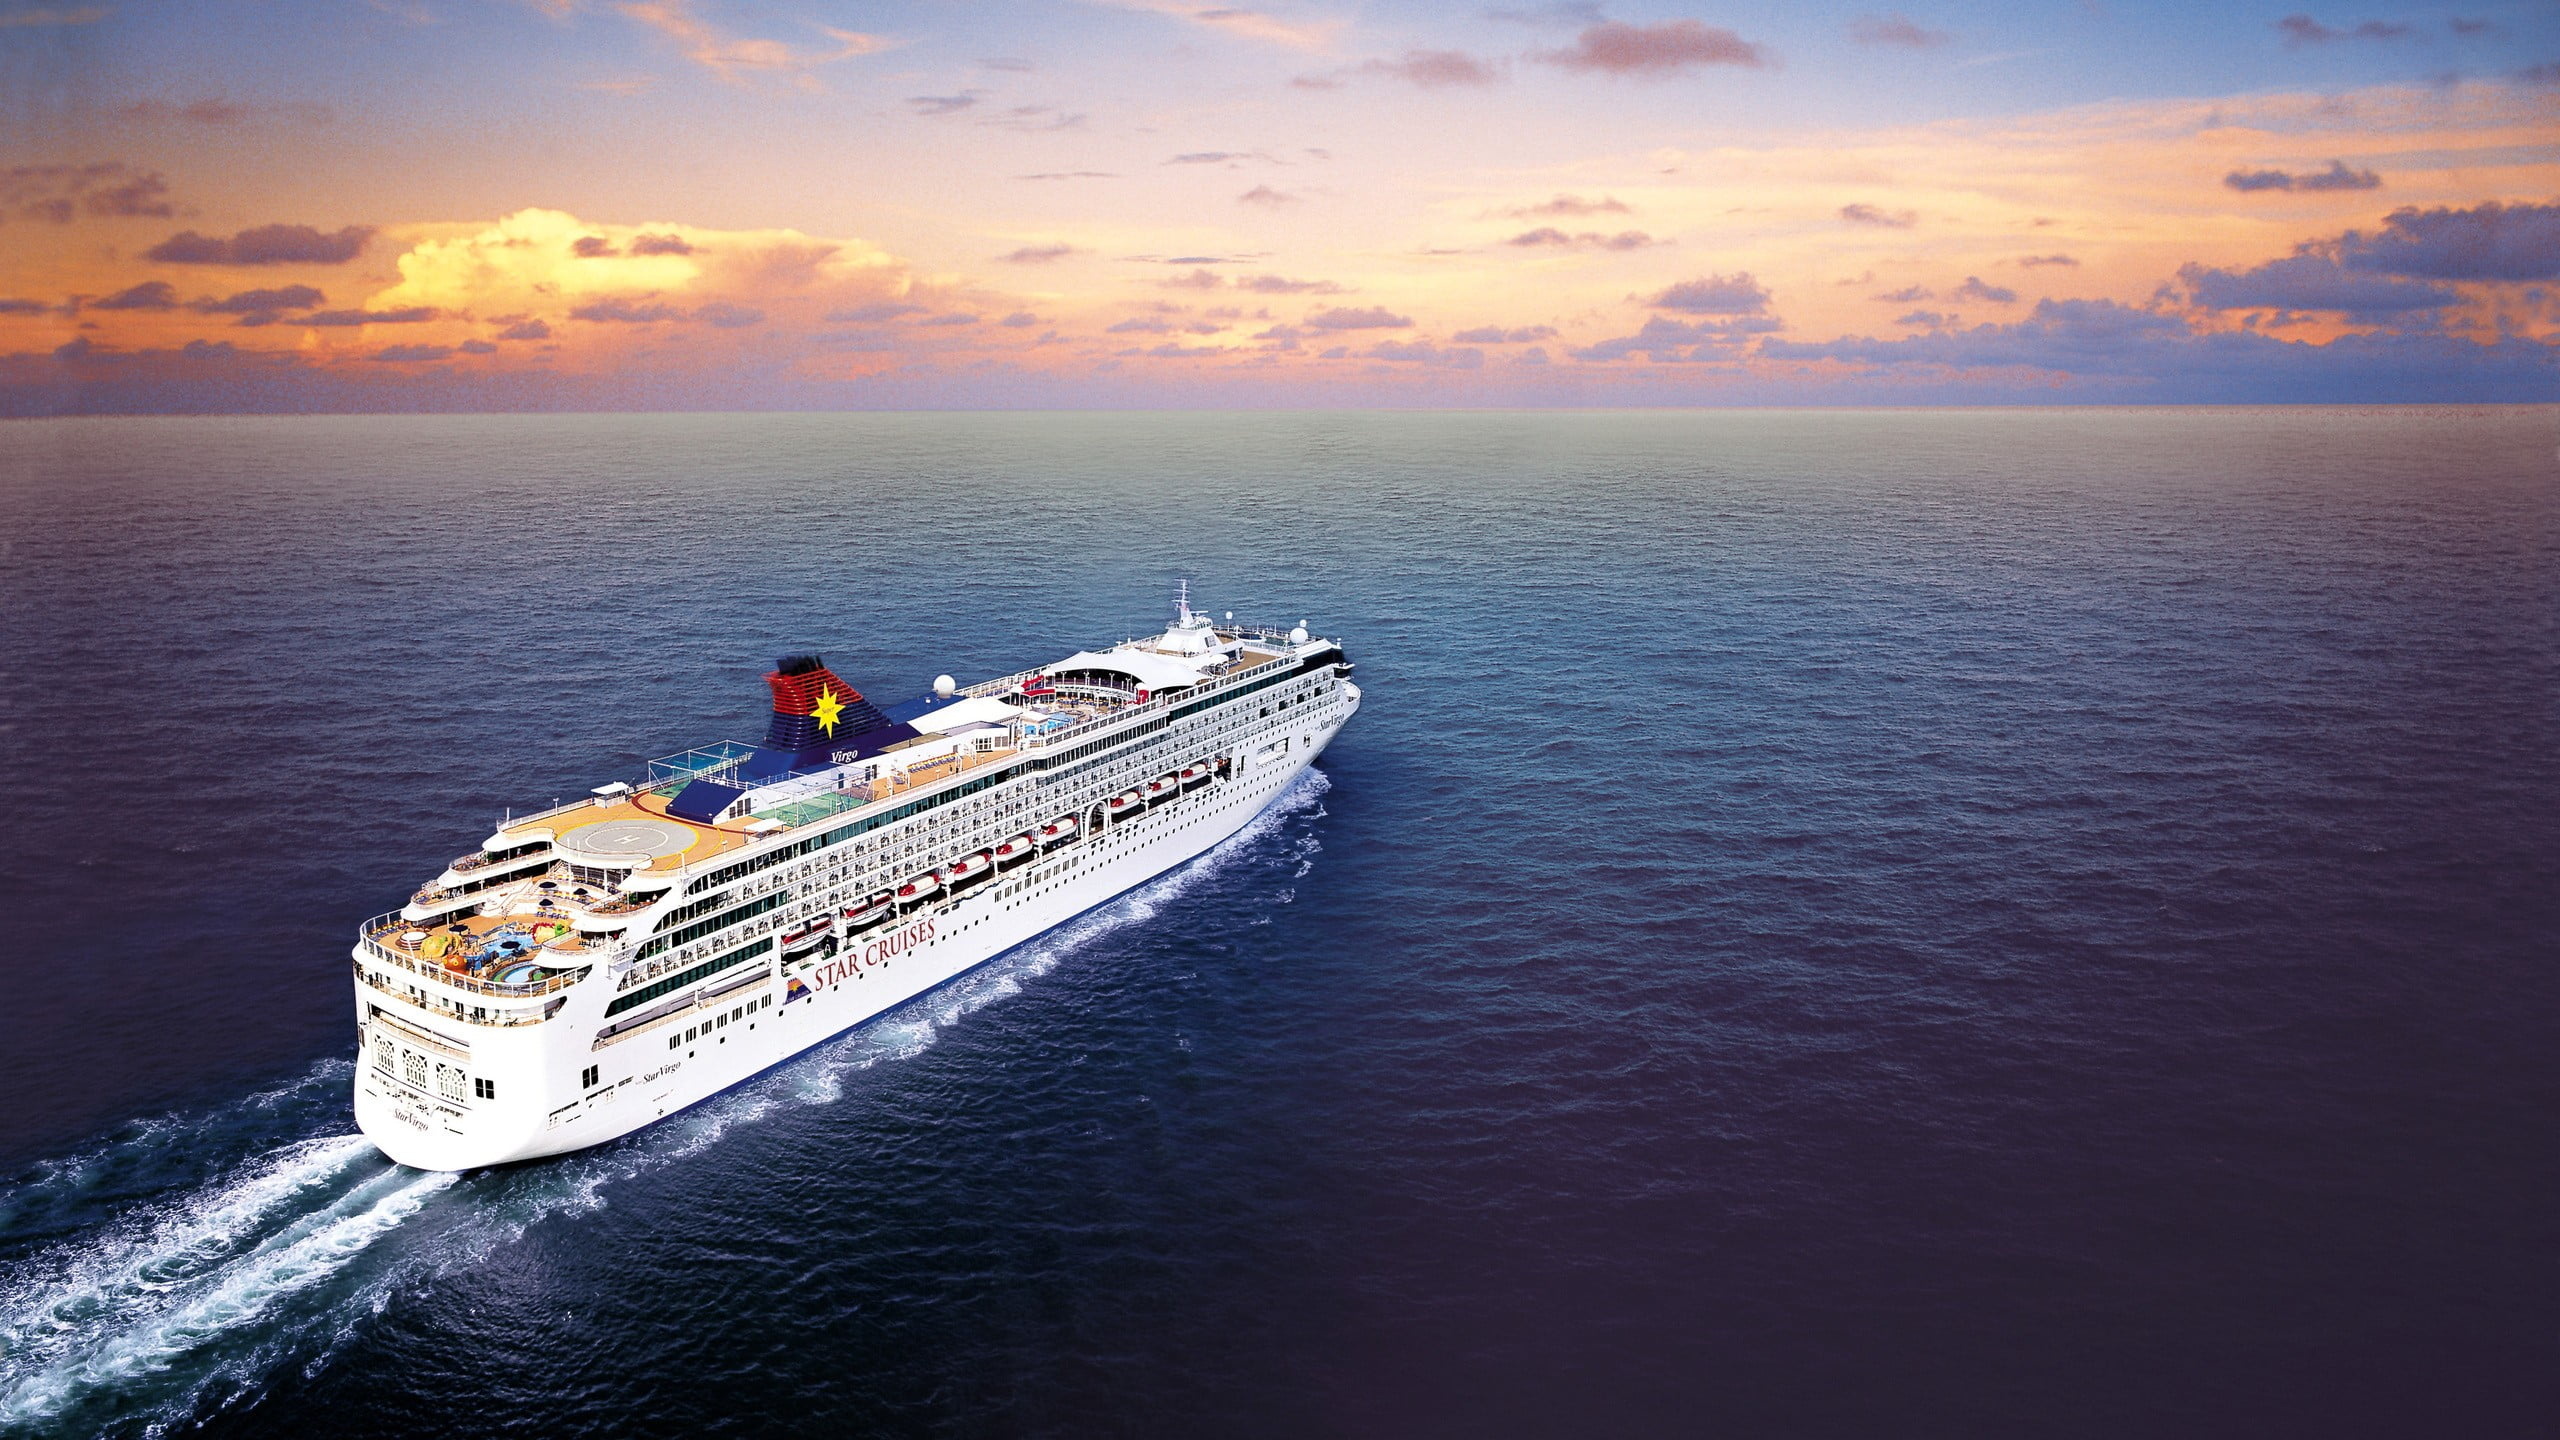 Cruiser (Ship): Star Cruises, Asia's finest cruise to Japan, Vietnam and more Asian destinations. 2560x1440 HD Wallpaper.